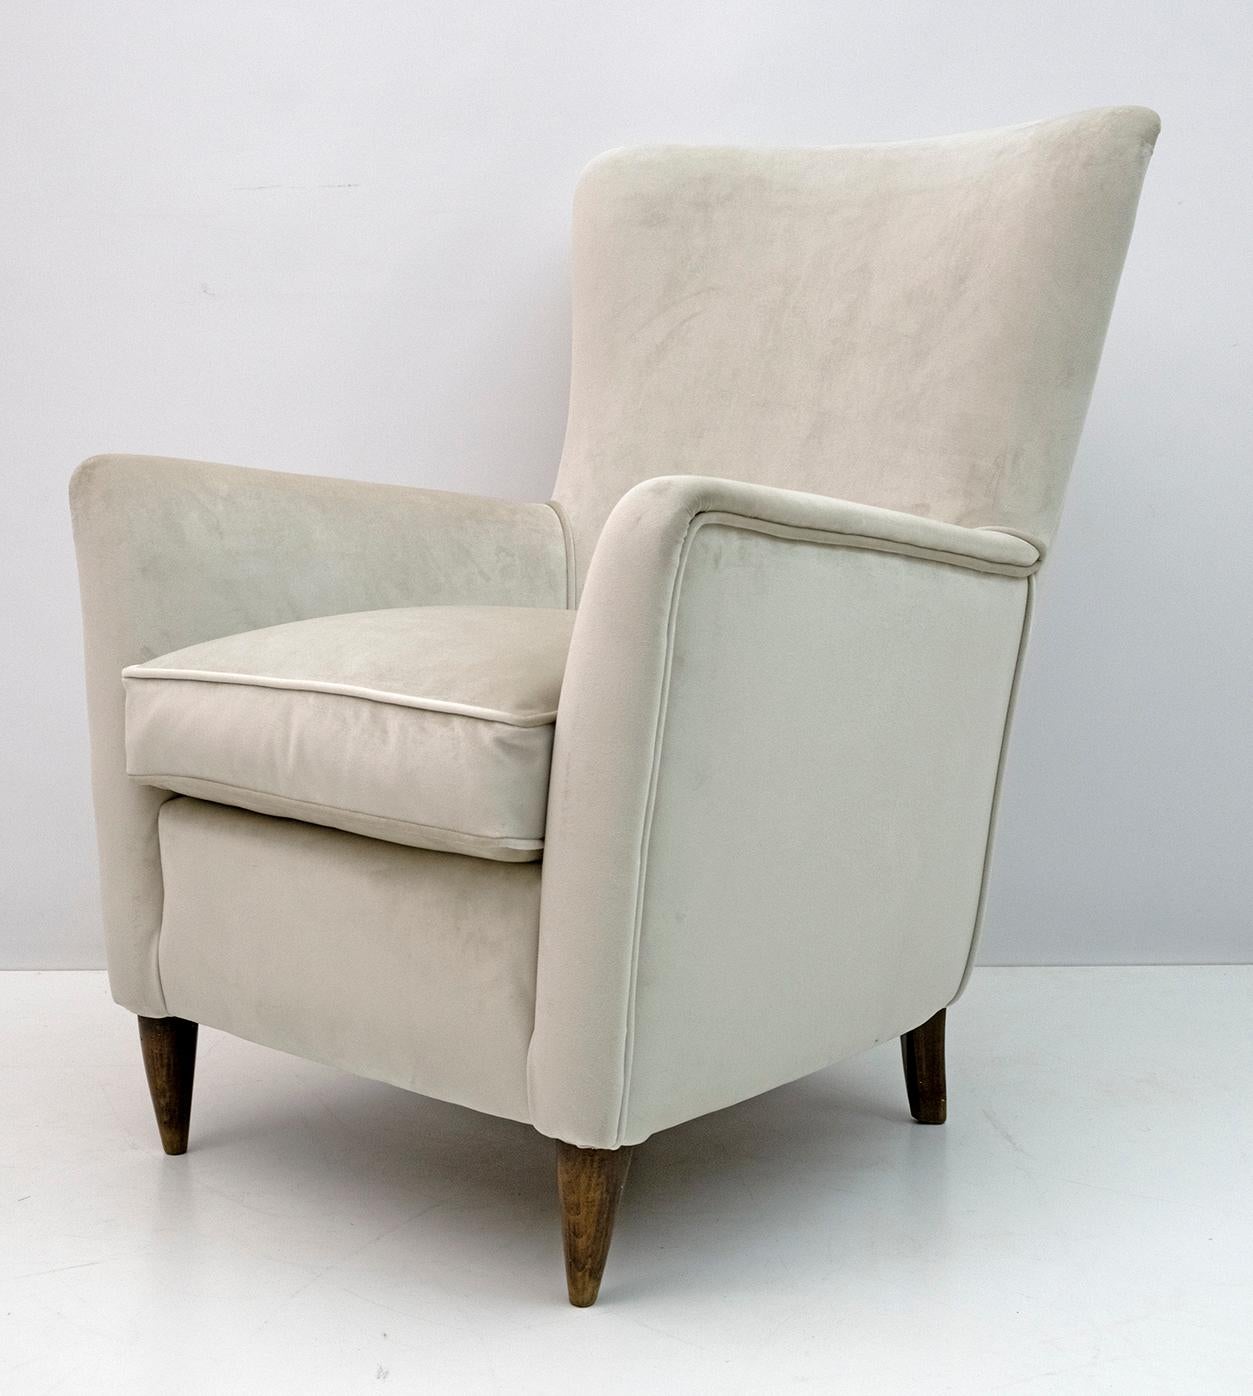 Elegant and splendid Mid-Century Modern armchair, attributed to Gio Ponti, 1950 for Edizioni ISA, Bergamo. The armchair has been restored and has a new light ivory velvet upholstery.